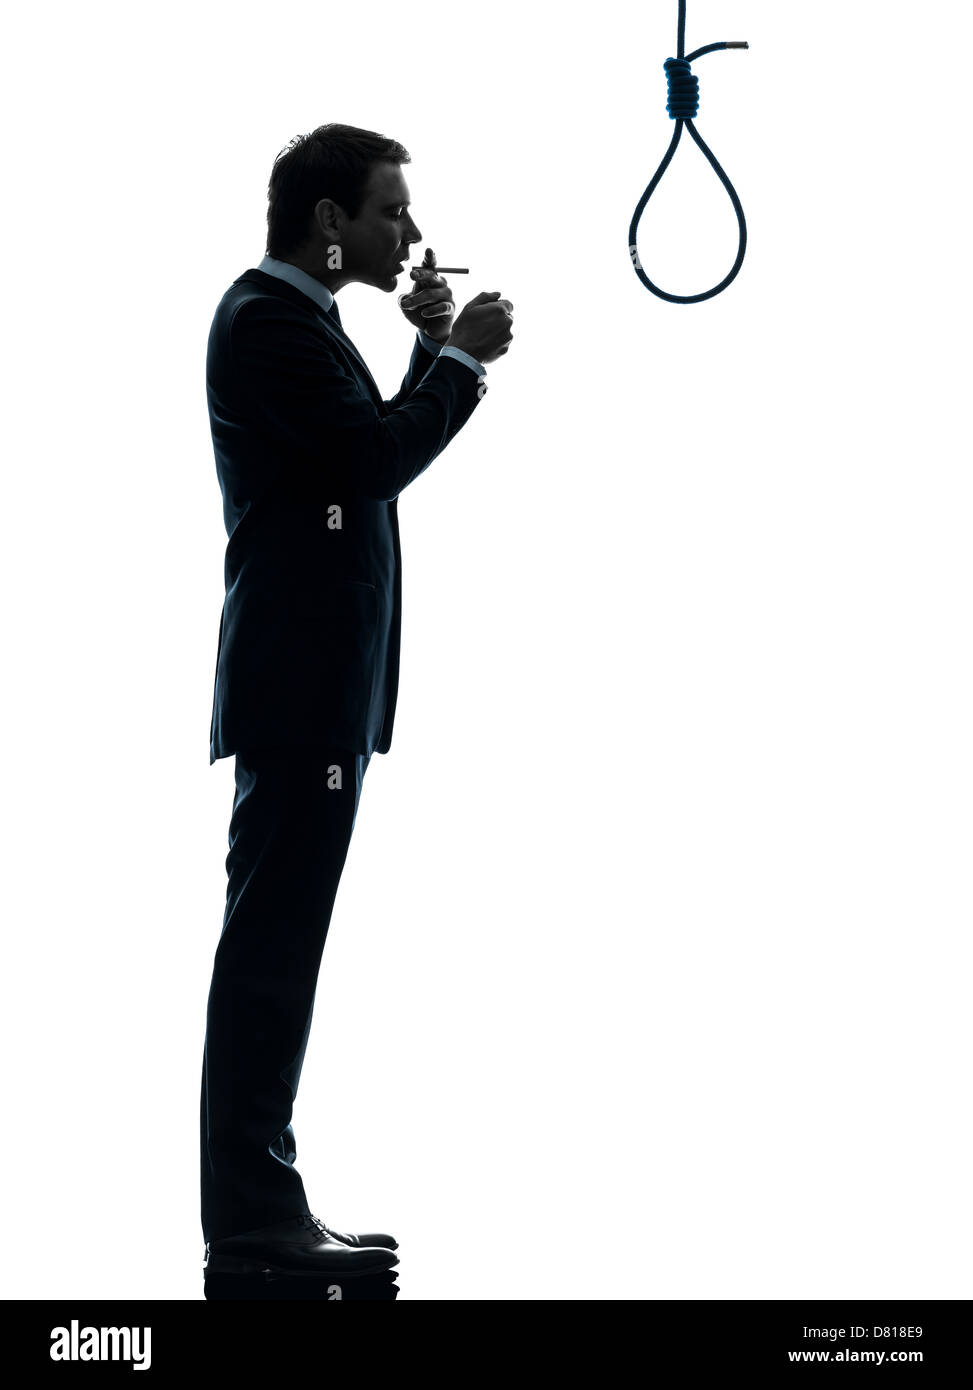 one  man smoking cigarette standing in front of hangman's noose in silhouette studio isolated on white background Stock Photo